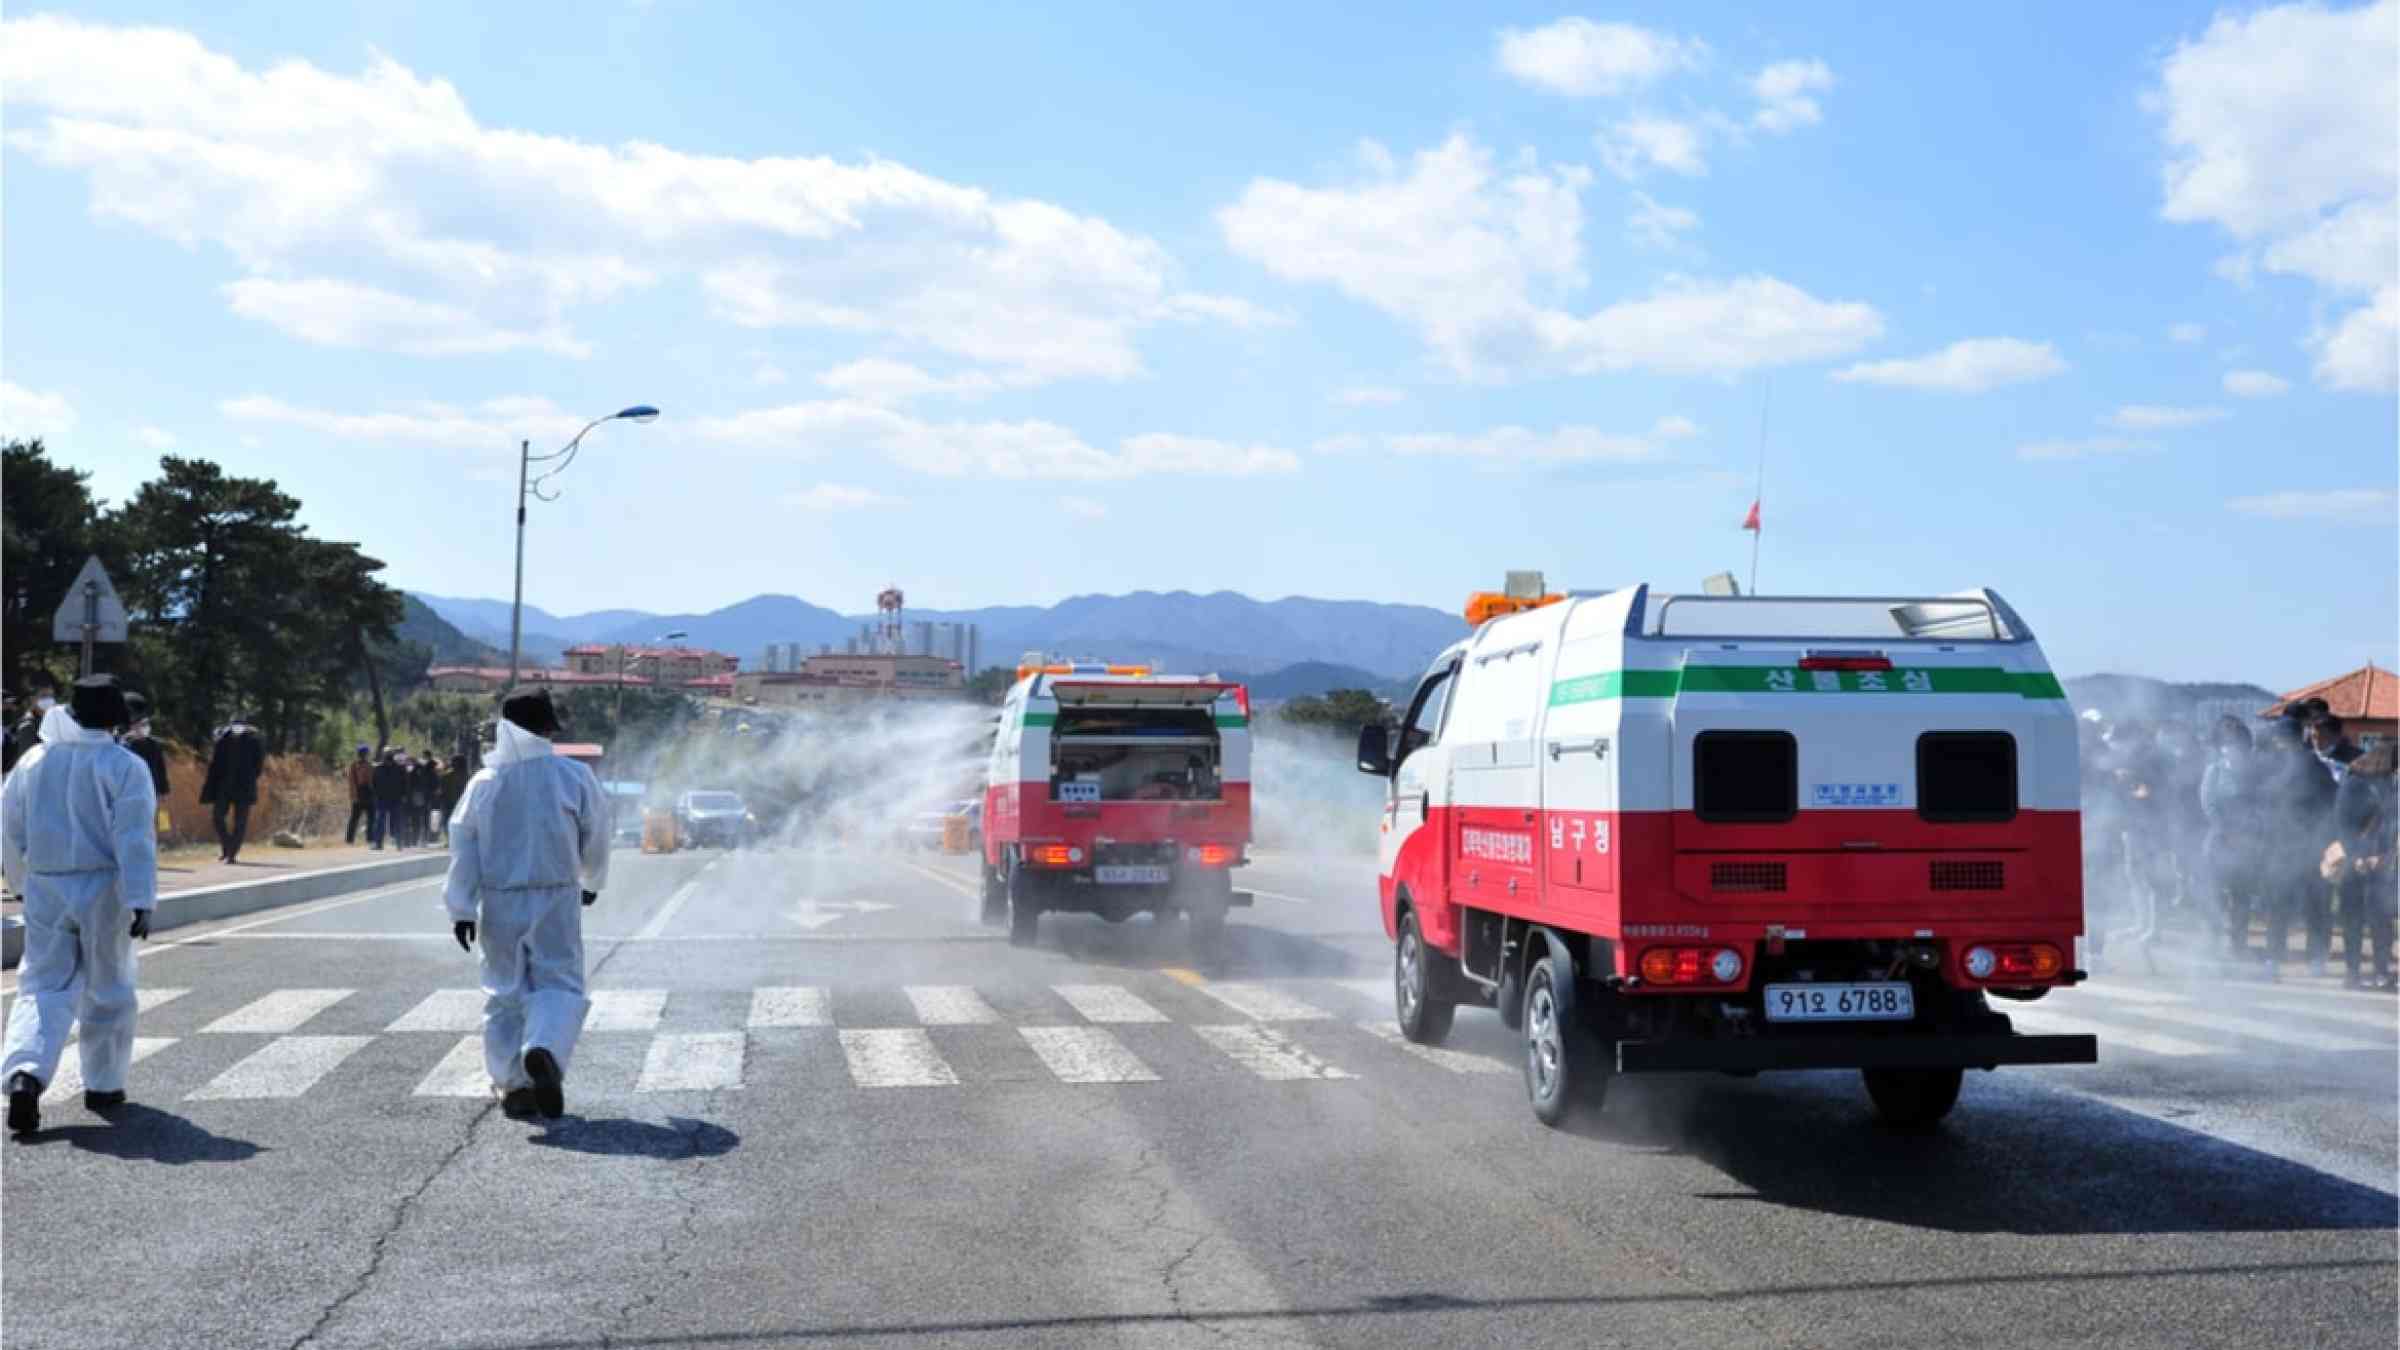 A Ponghang City fumigator truck is conducting COVID-19 disinfection in the city of Ocheon-eup in Pohang, North Gyeongsang Province, South Korea on the afternoon of March 16, 2020.